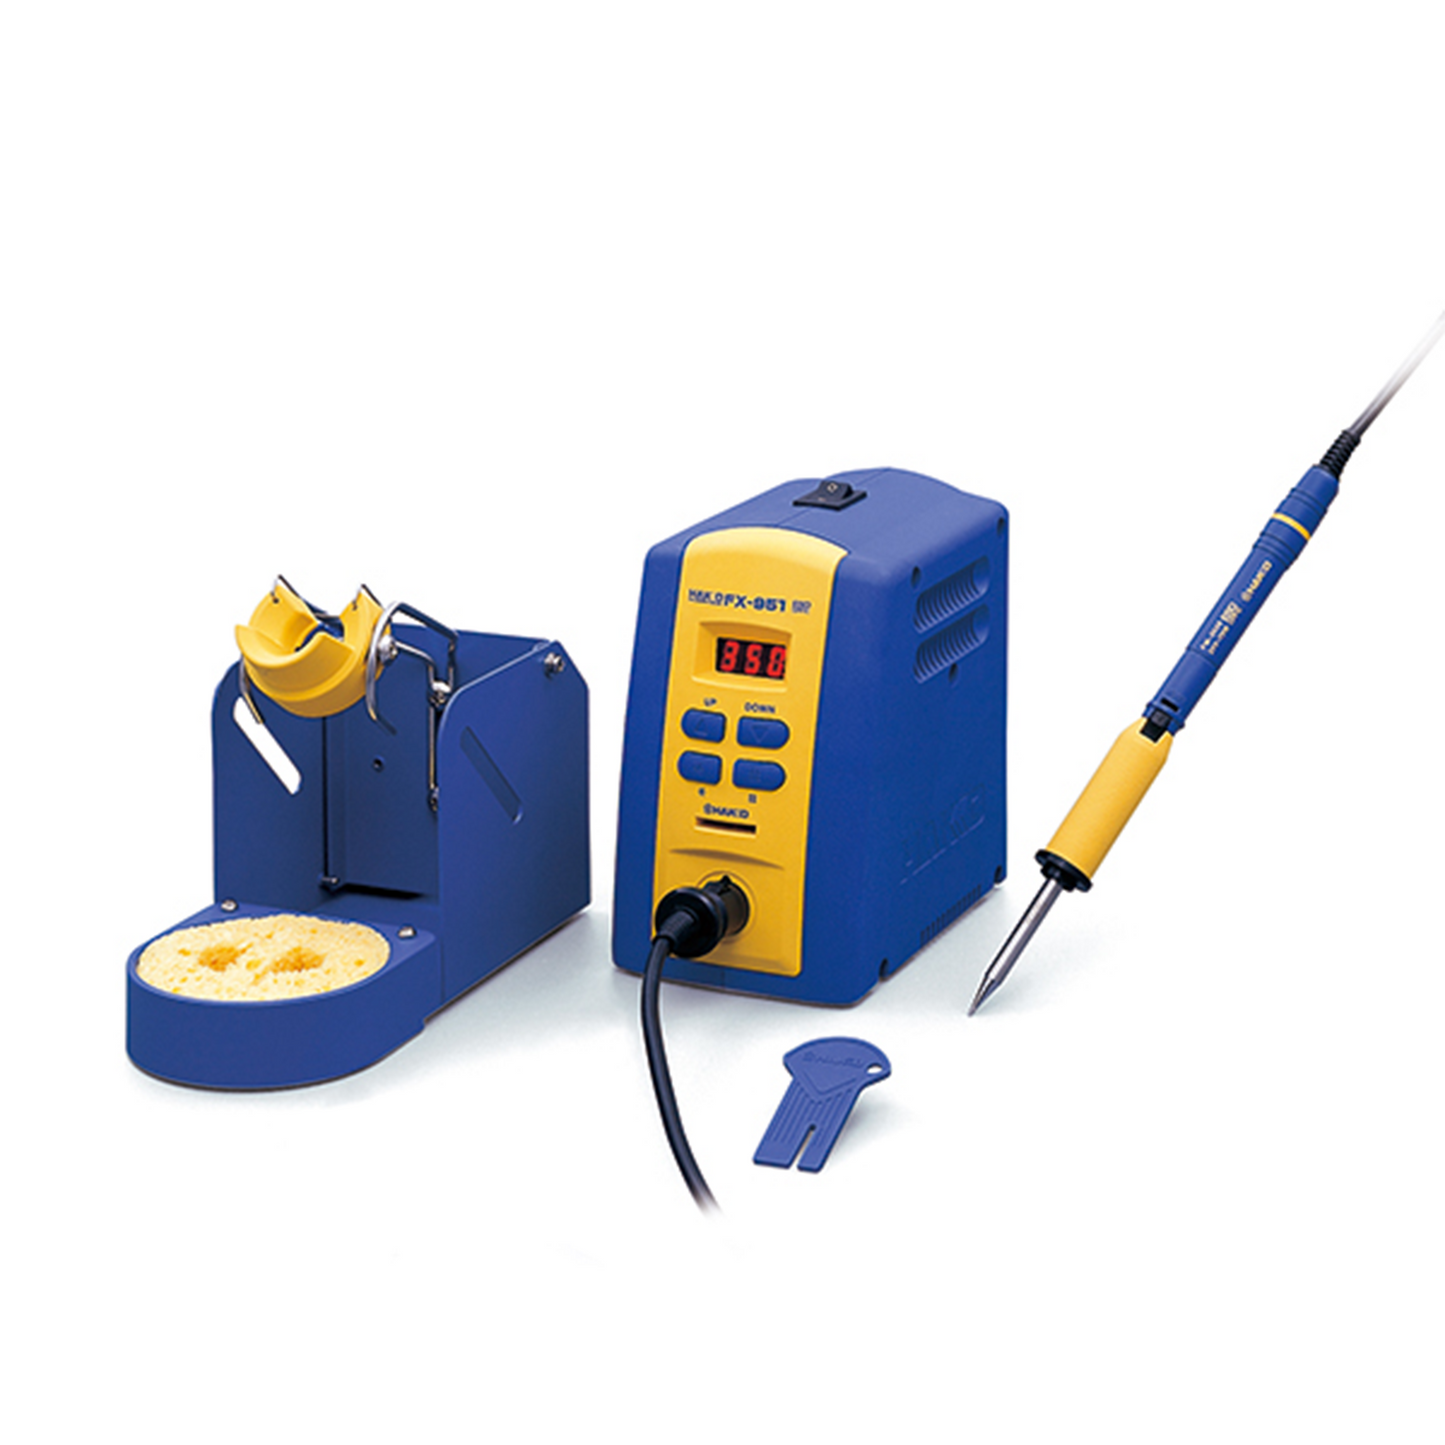 Hakko FX-951 Soldering Station 75W Soldering Iron SMD assembly pcb manual soldering